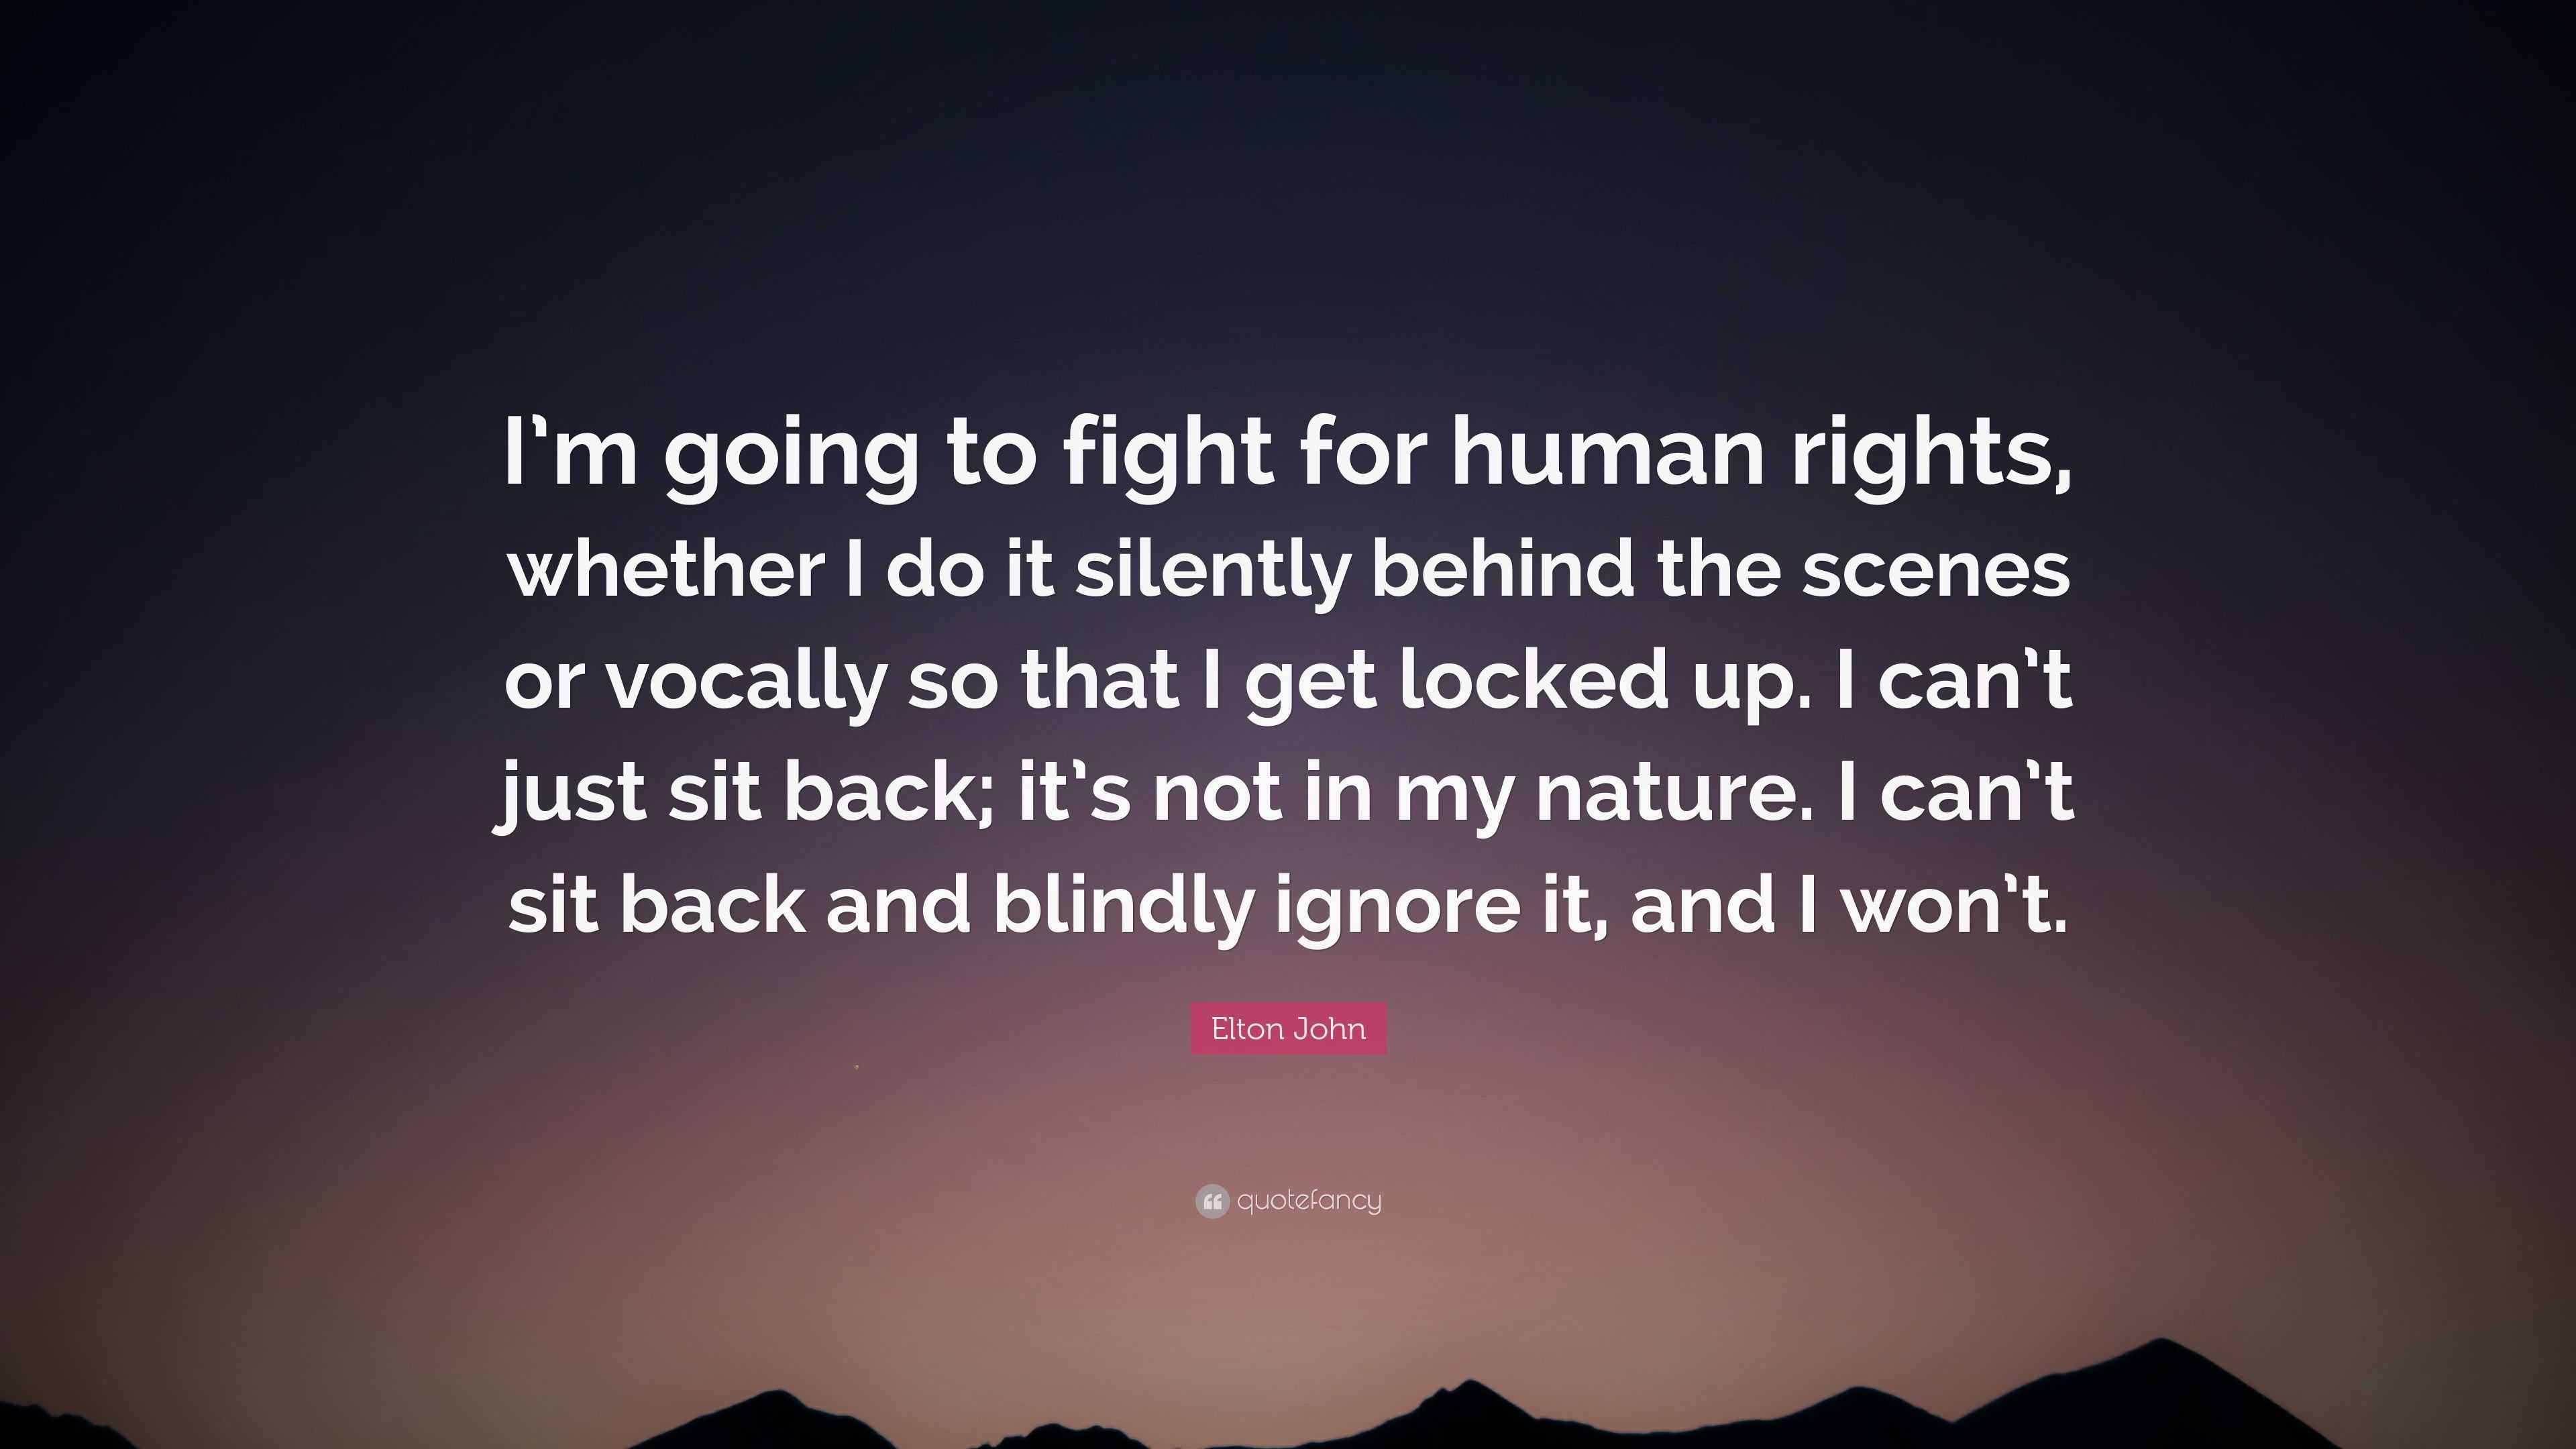 Hedendaags Elton John Quote: “I'm going to fight for human rights, whether I CI-39